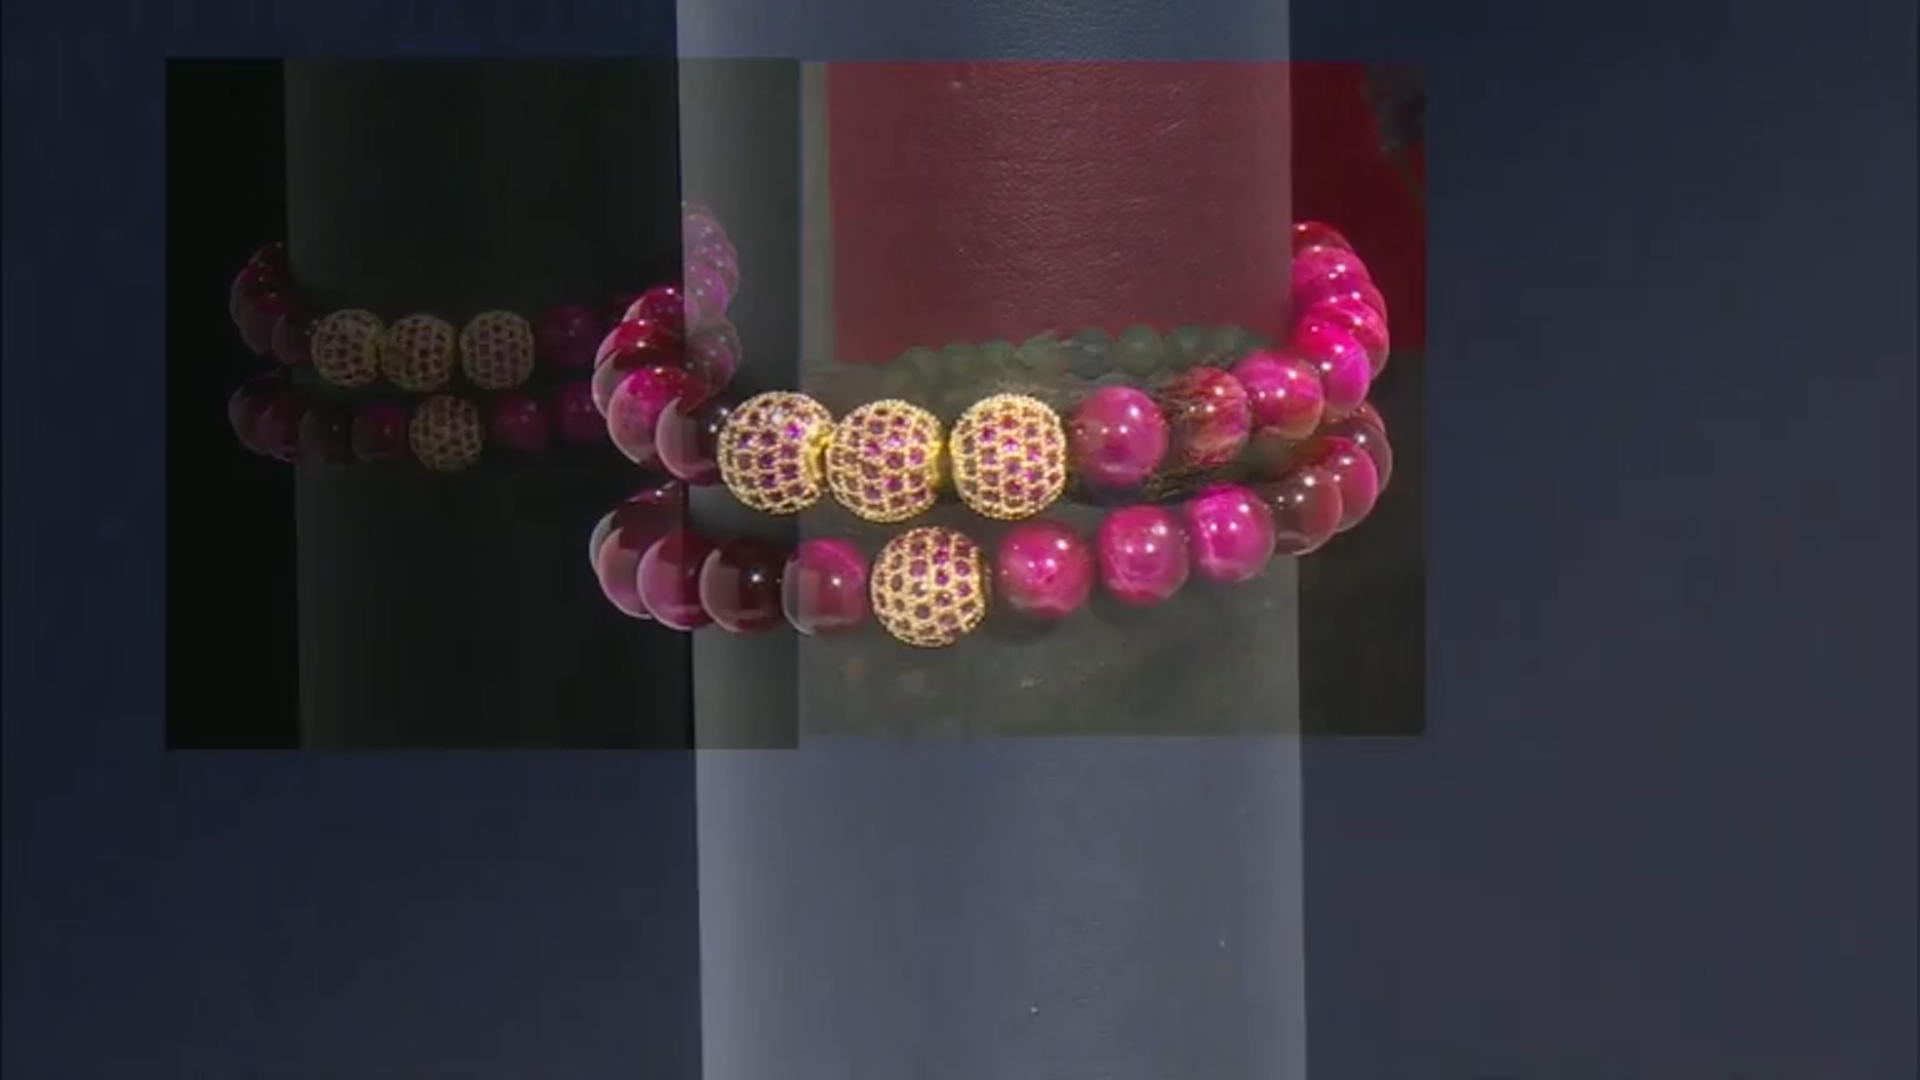 Pink Tigers Eye and Pink Crystal Gold-Tone Set of 2 Stretch Bracelets Video Thumbnail